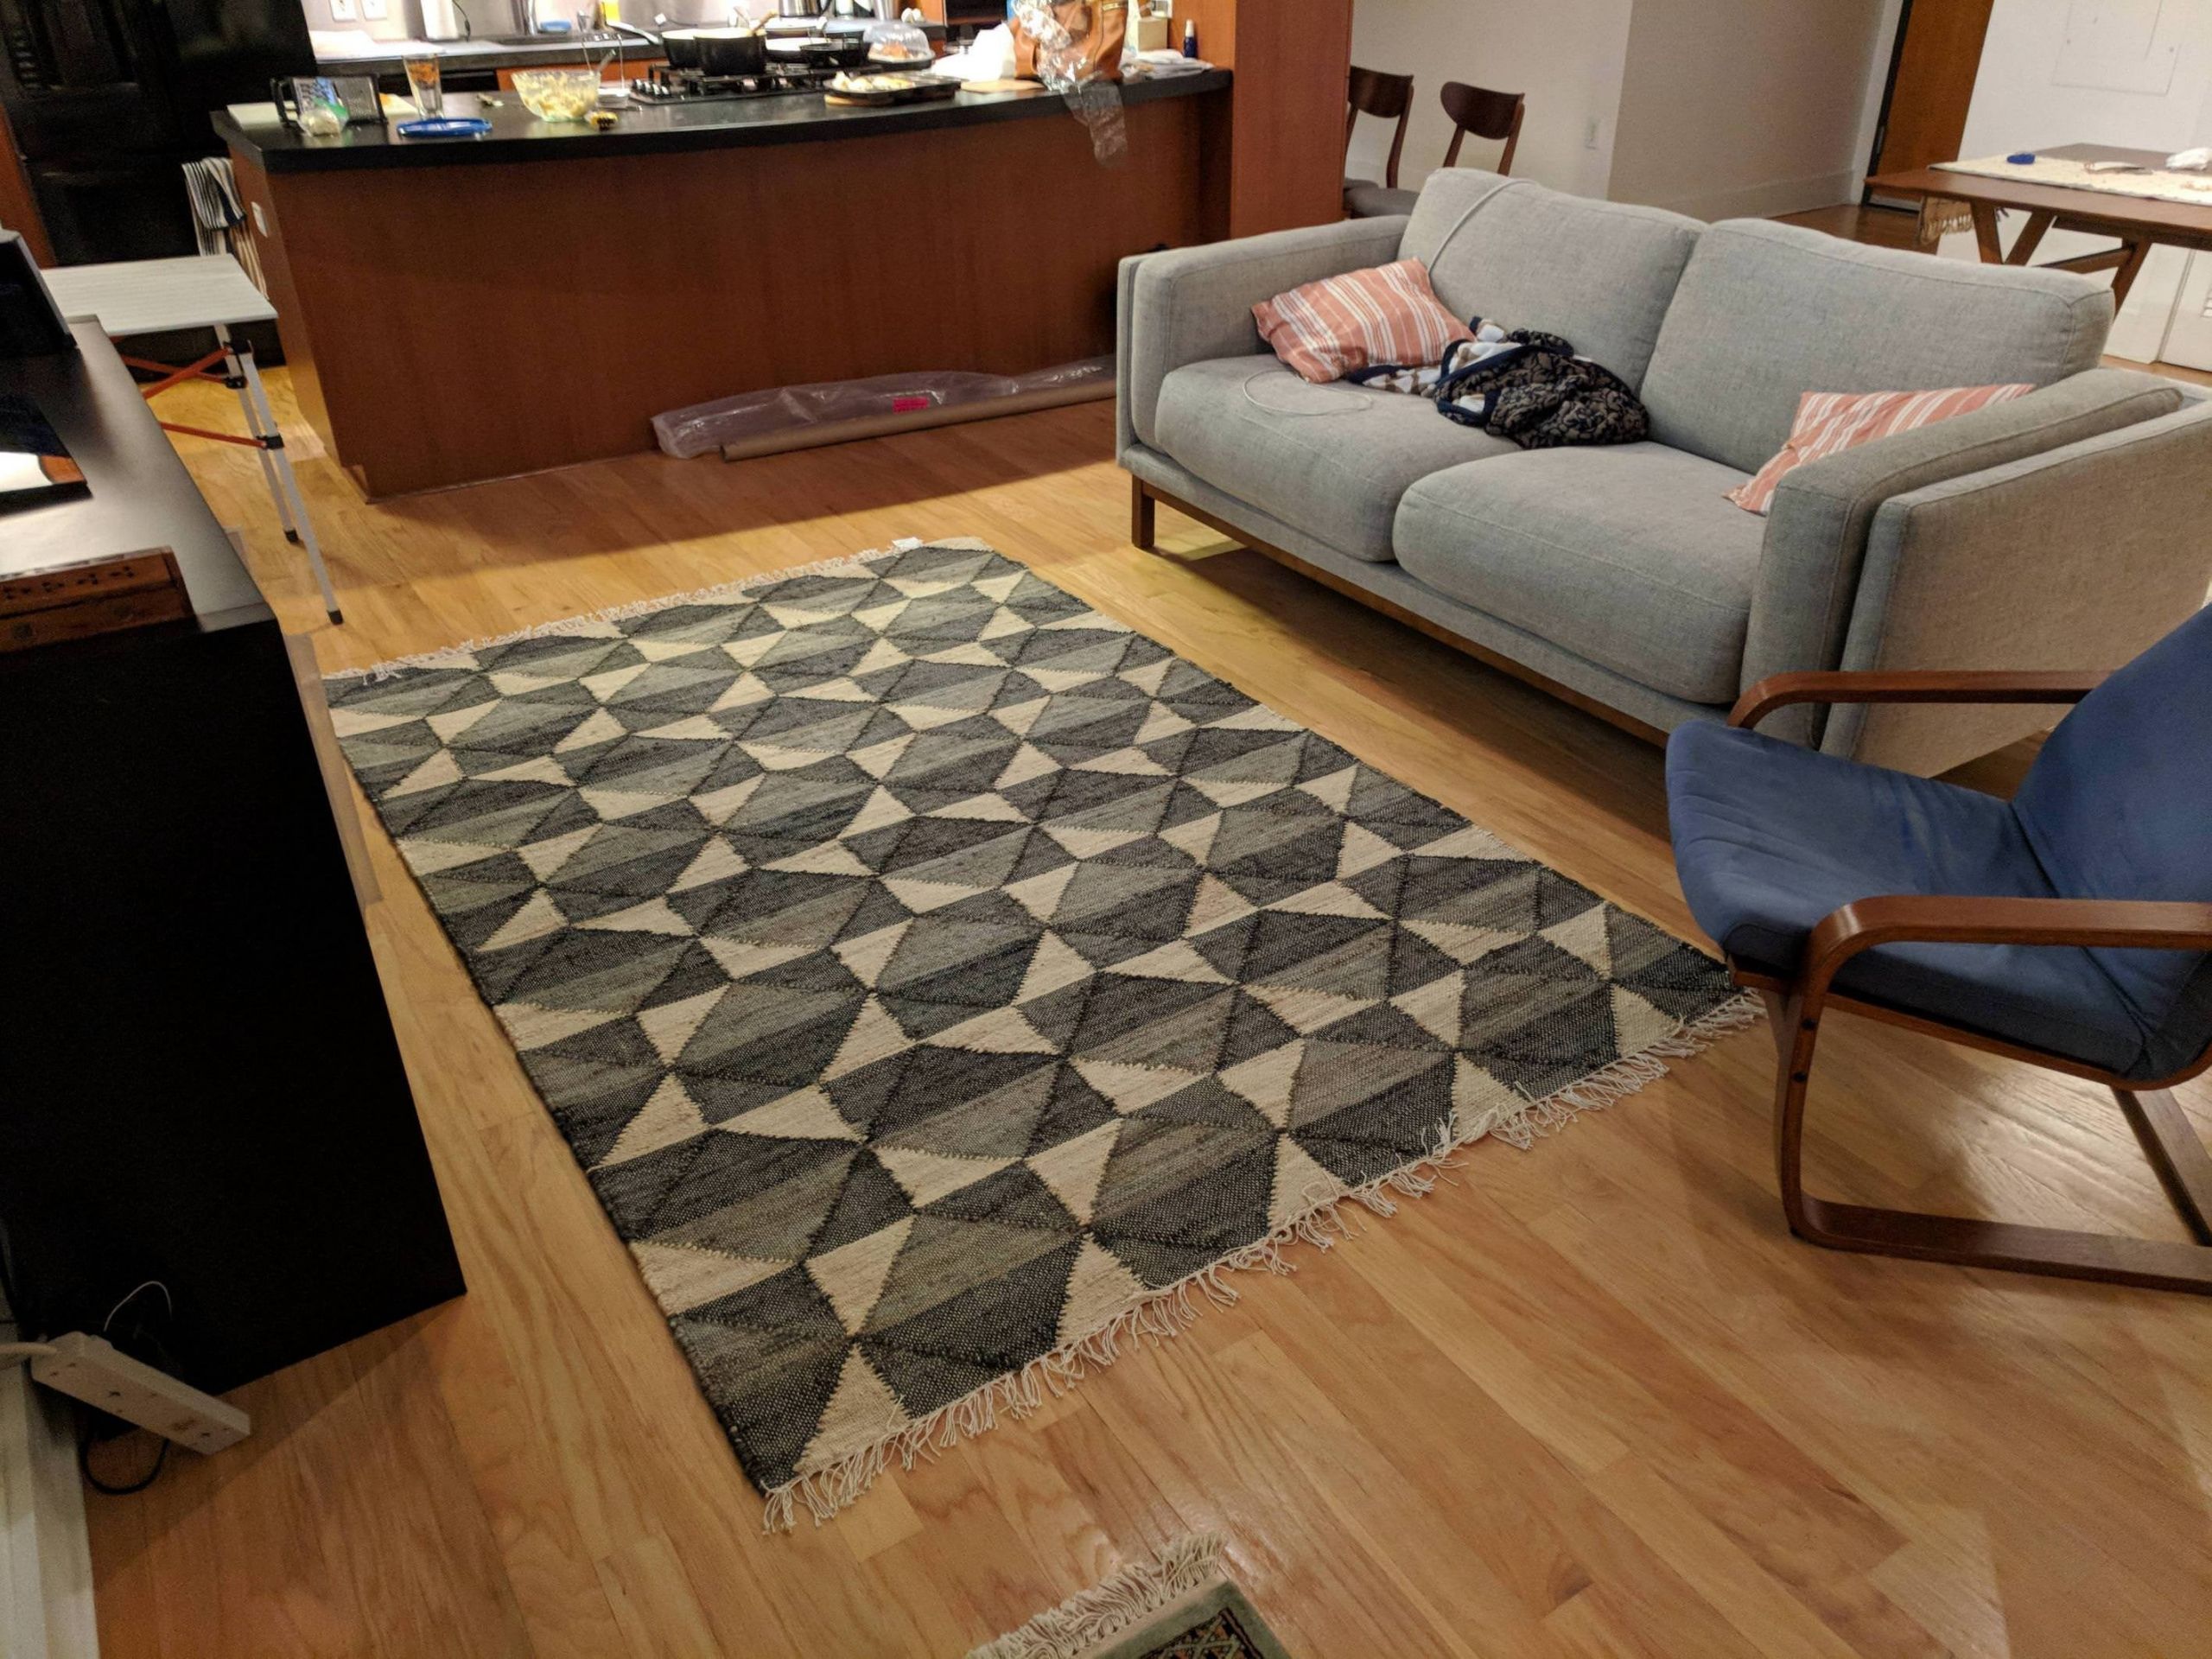 5X8 Rug In Living Room
 Is this 5x8 rug too small for my living room Excuse the